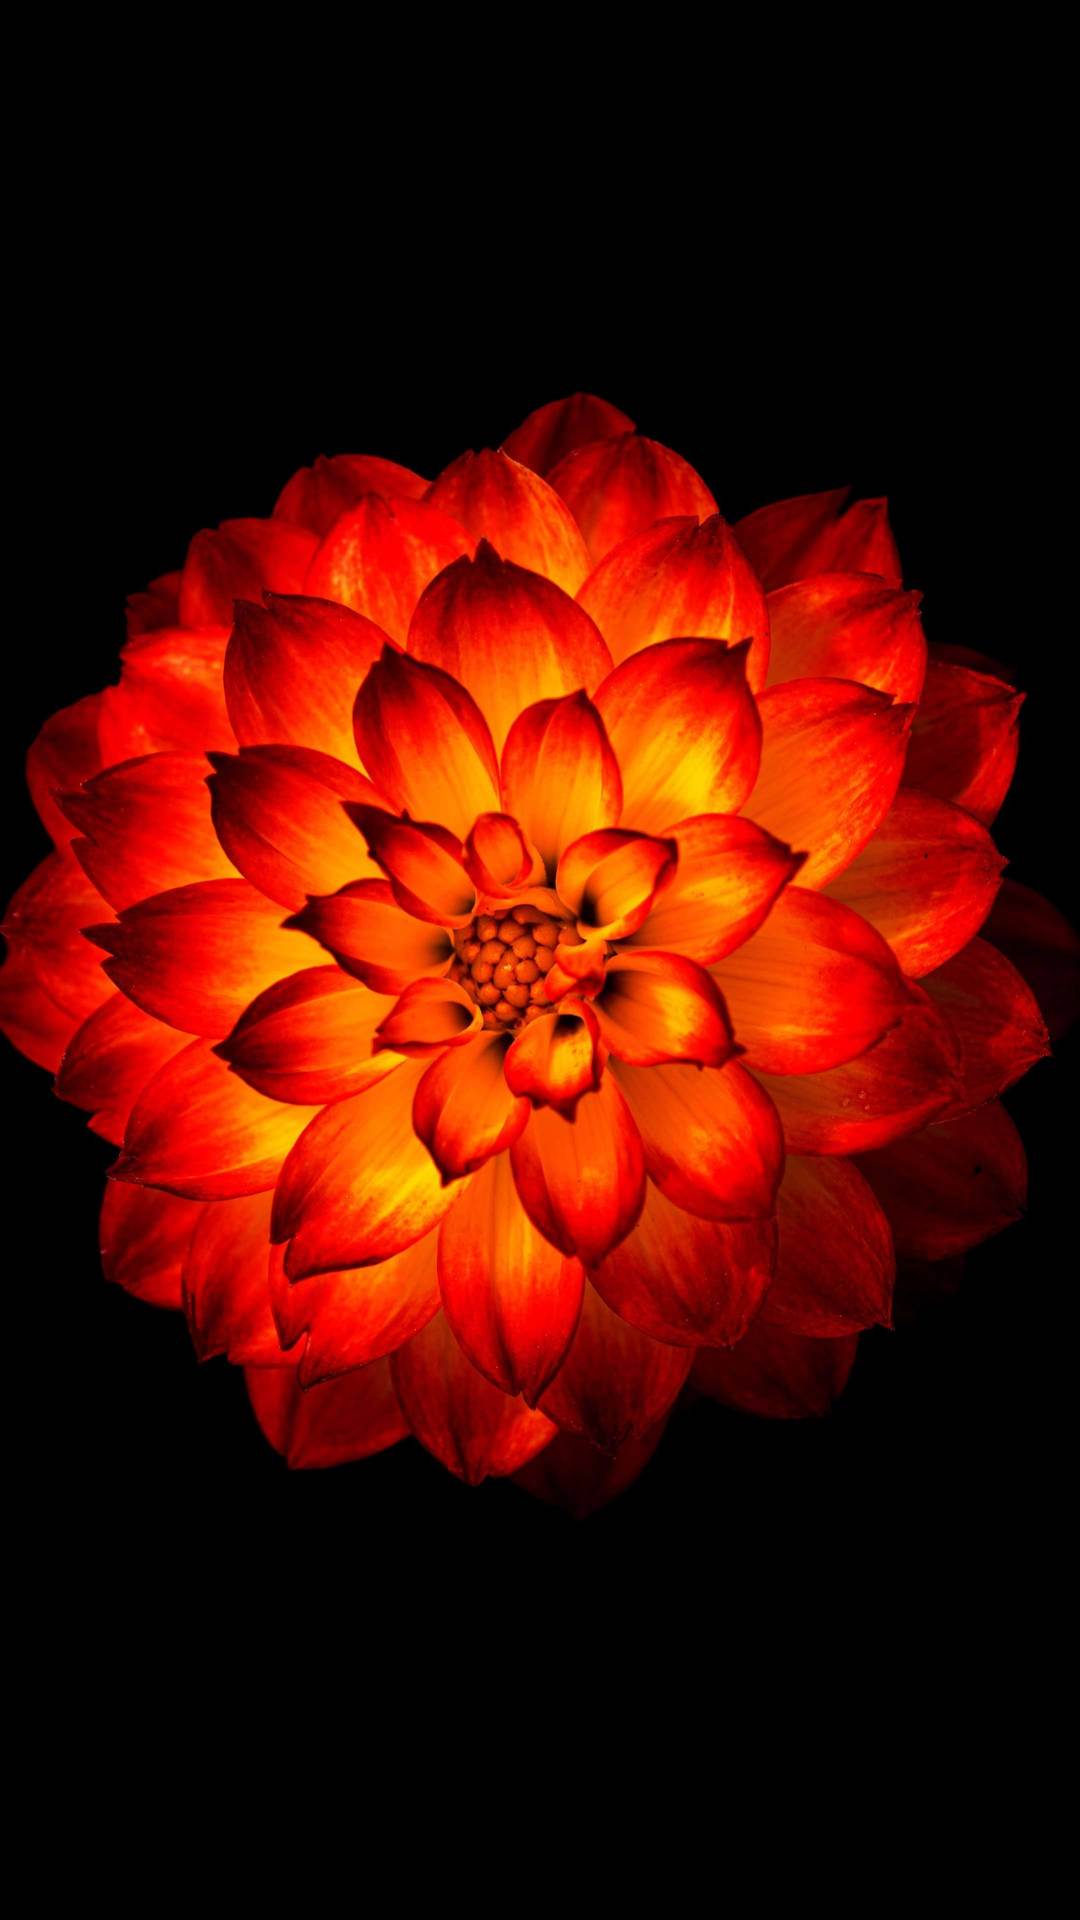 Ethereal Glow of a Dahlia - Flower Phone Wallpaper Wallpaper